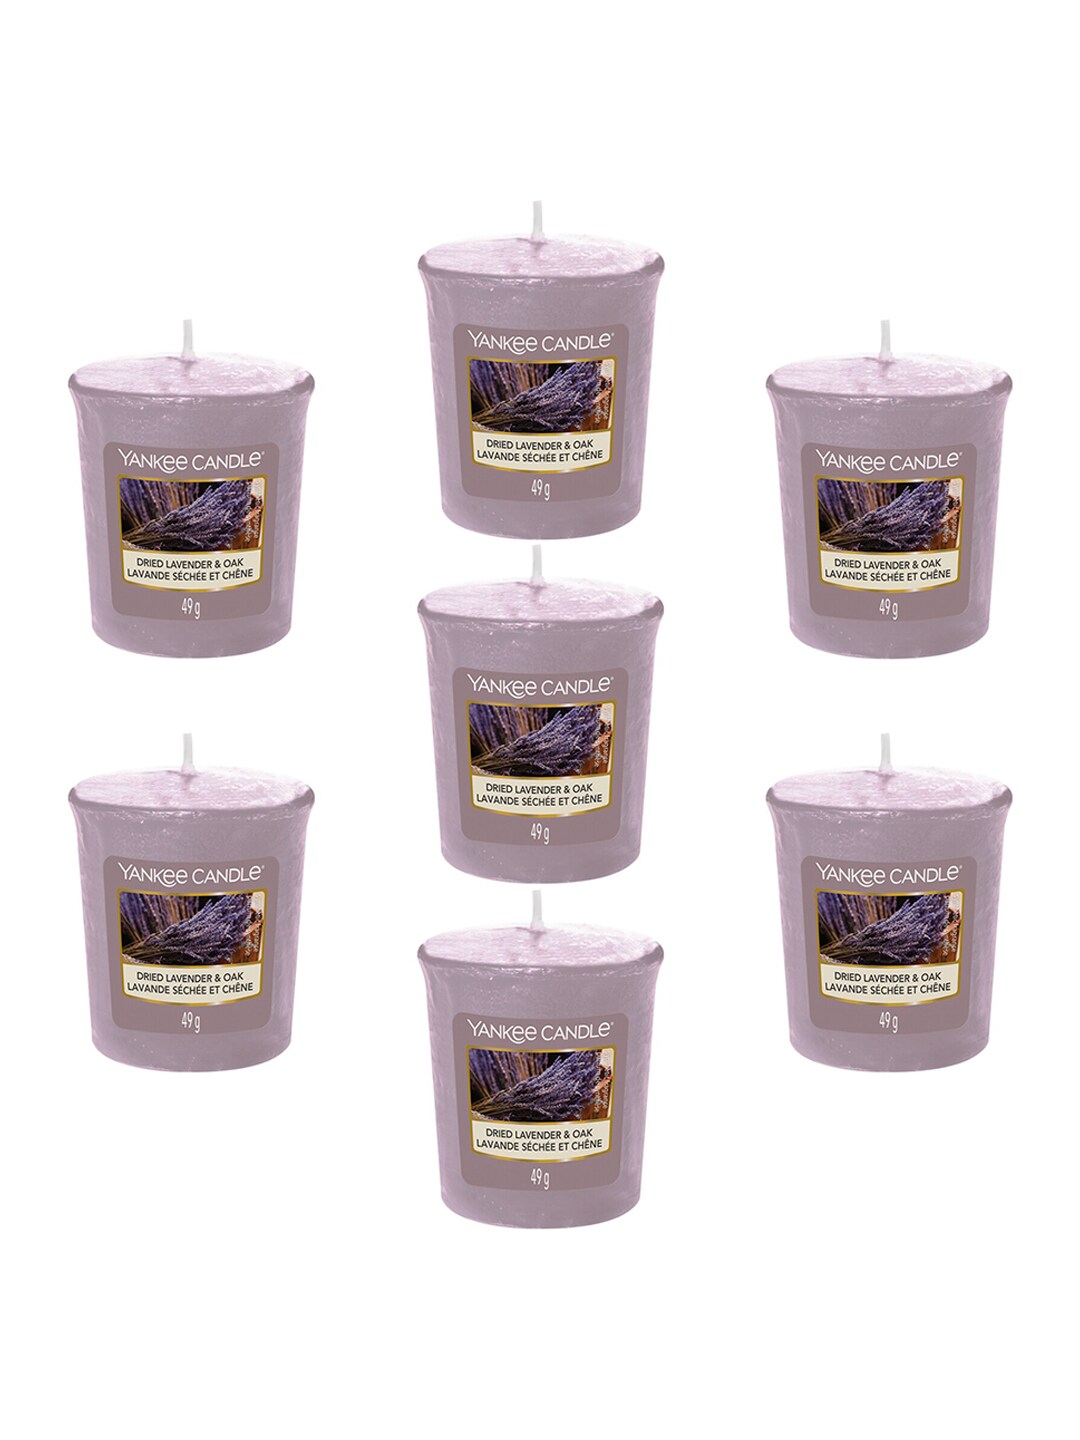 YANKEE CANDLE Set Of 7 Purple Solid Classic Votive Dried Lavender & Oak Scented Candles Price in India